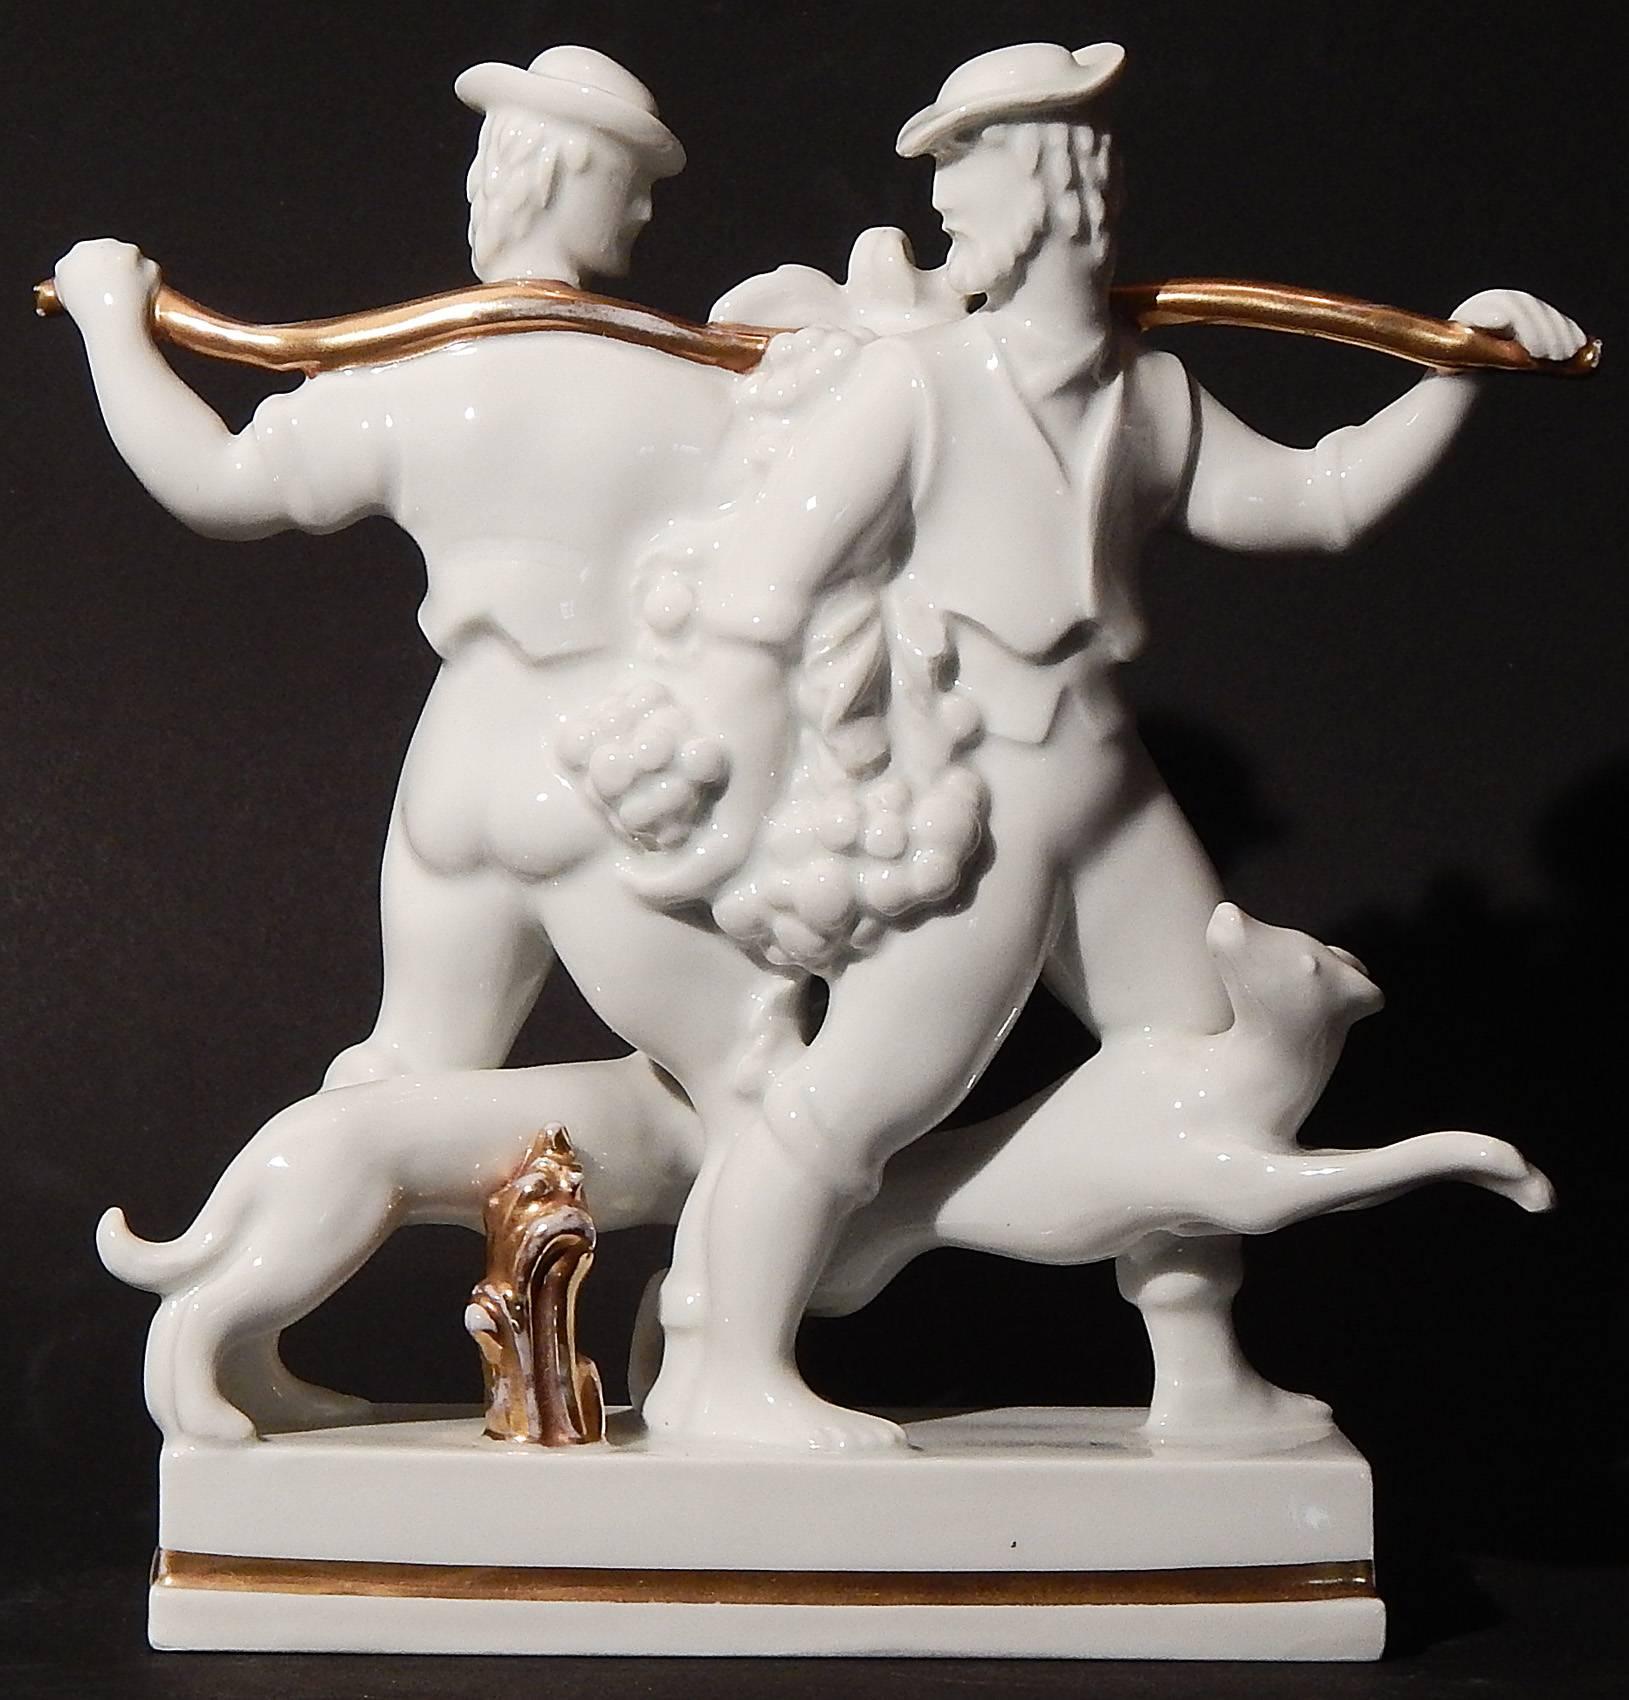 Although Gio Ponti, the protean artist, sculptor and designer, was highly prolific over many years in his native Italy, this porcelain sculpture of two young men carrying an enormous cluster of grapes, with two lively hounds underfoot, is especially